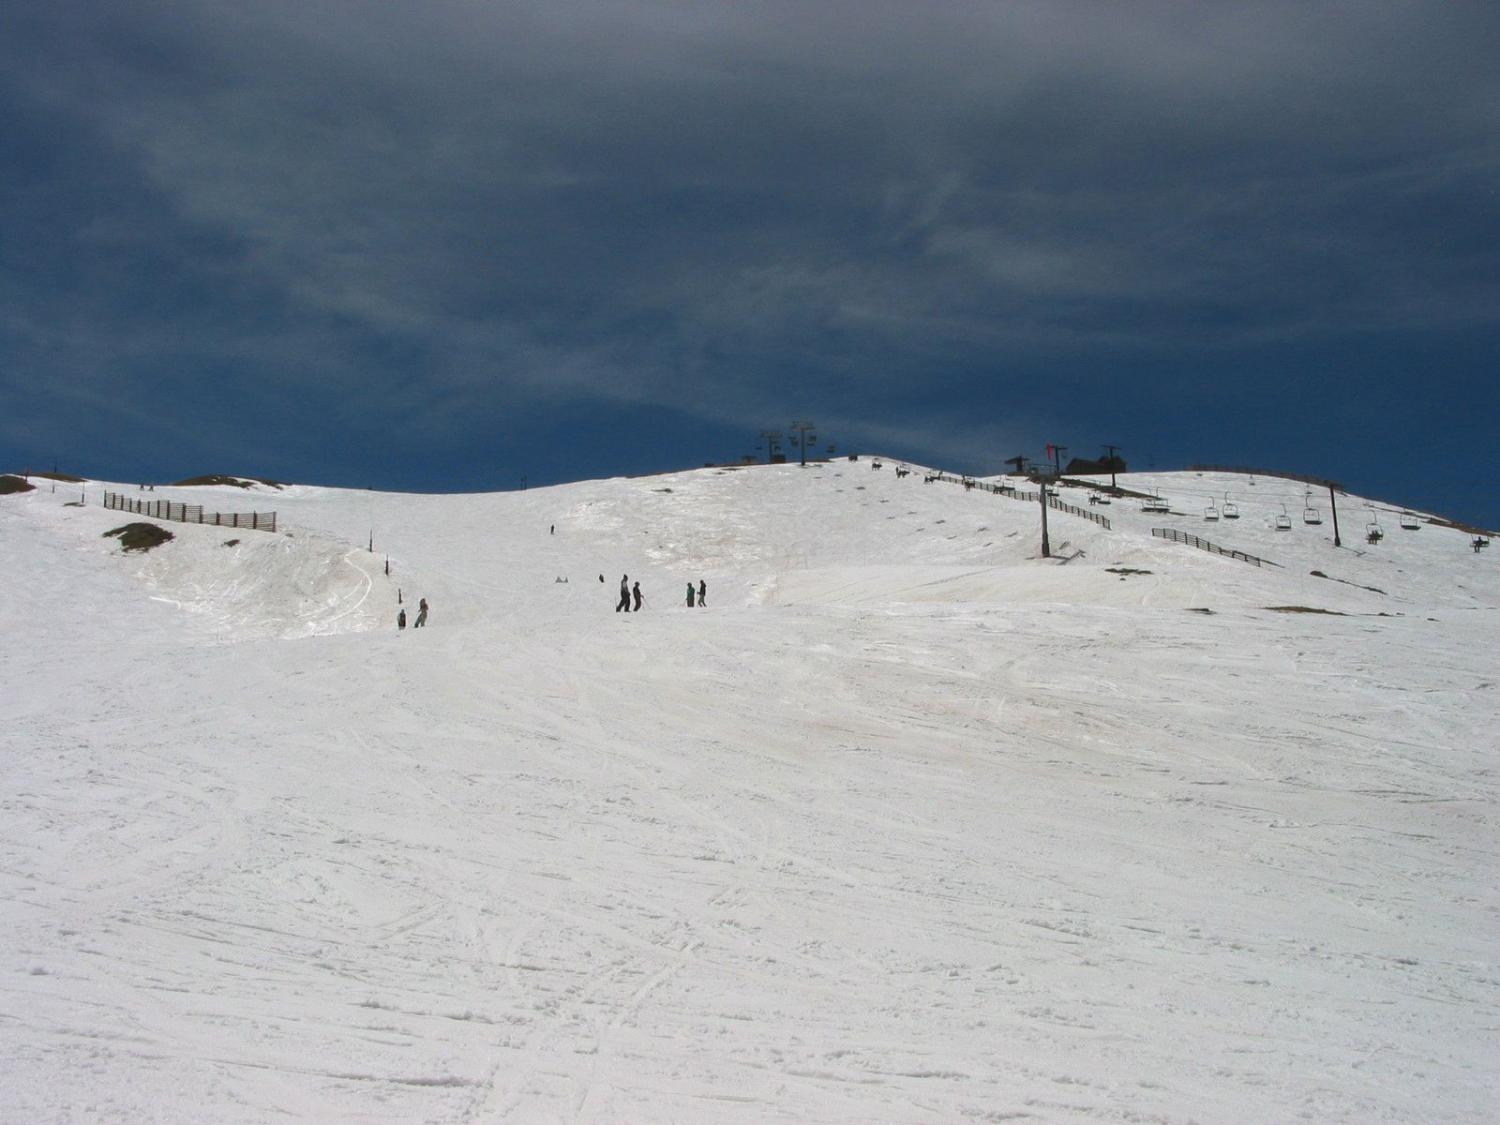 The Lenawee Chairlift and the Lenawee Face Ski Run.